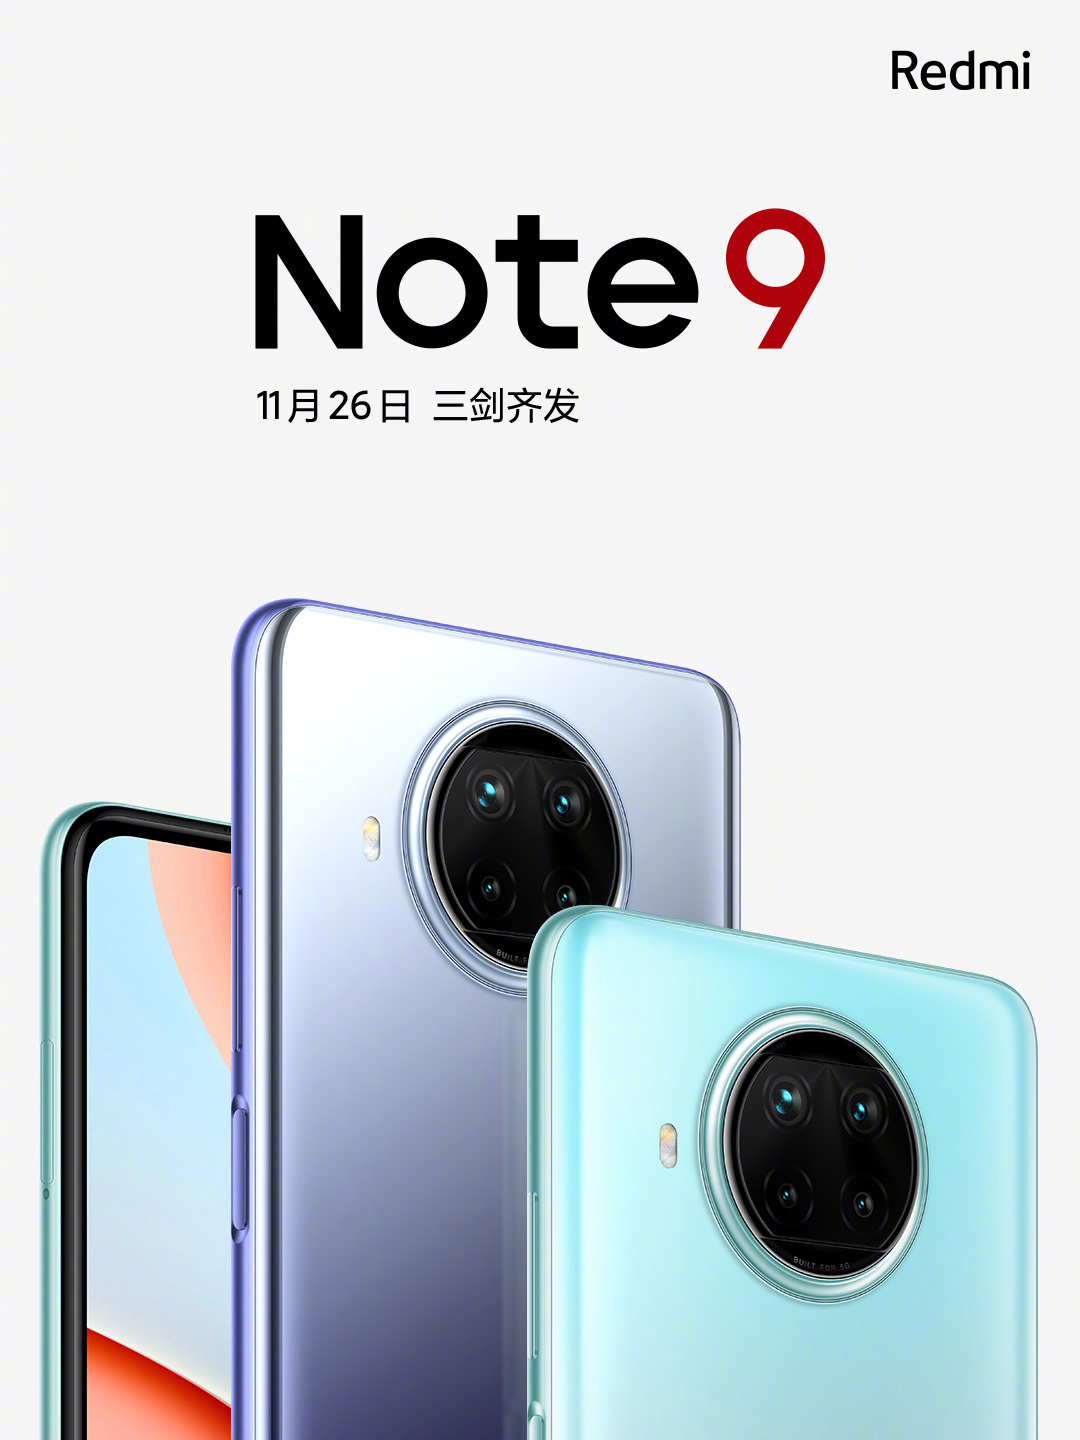 Redmi Note 9 5G series launch date is November 26